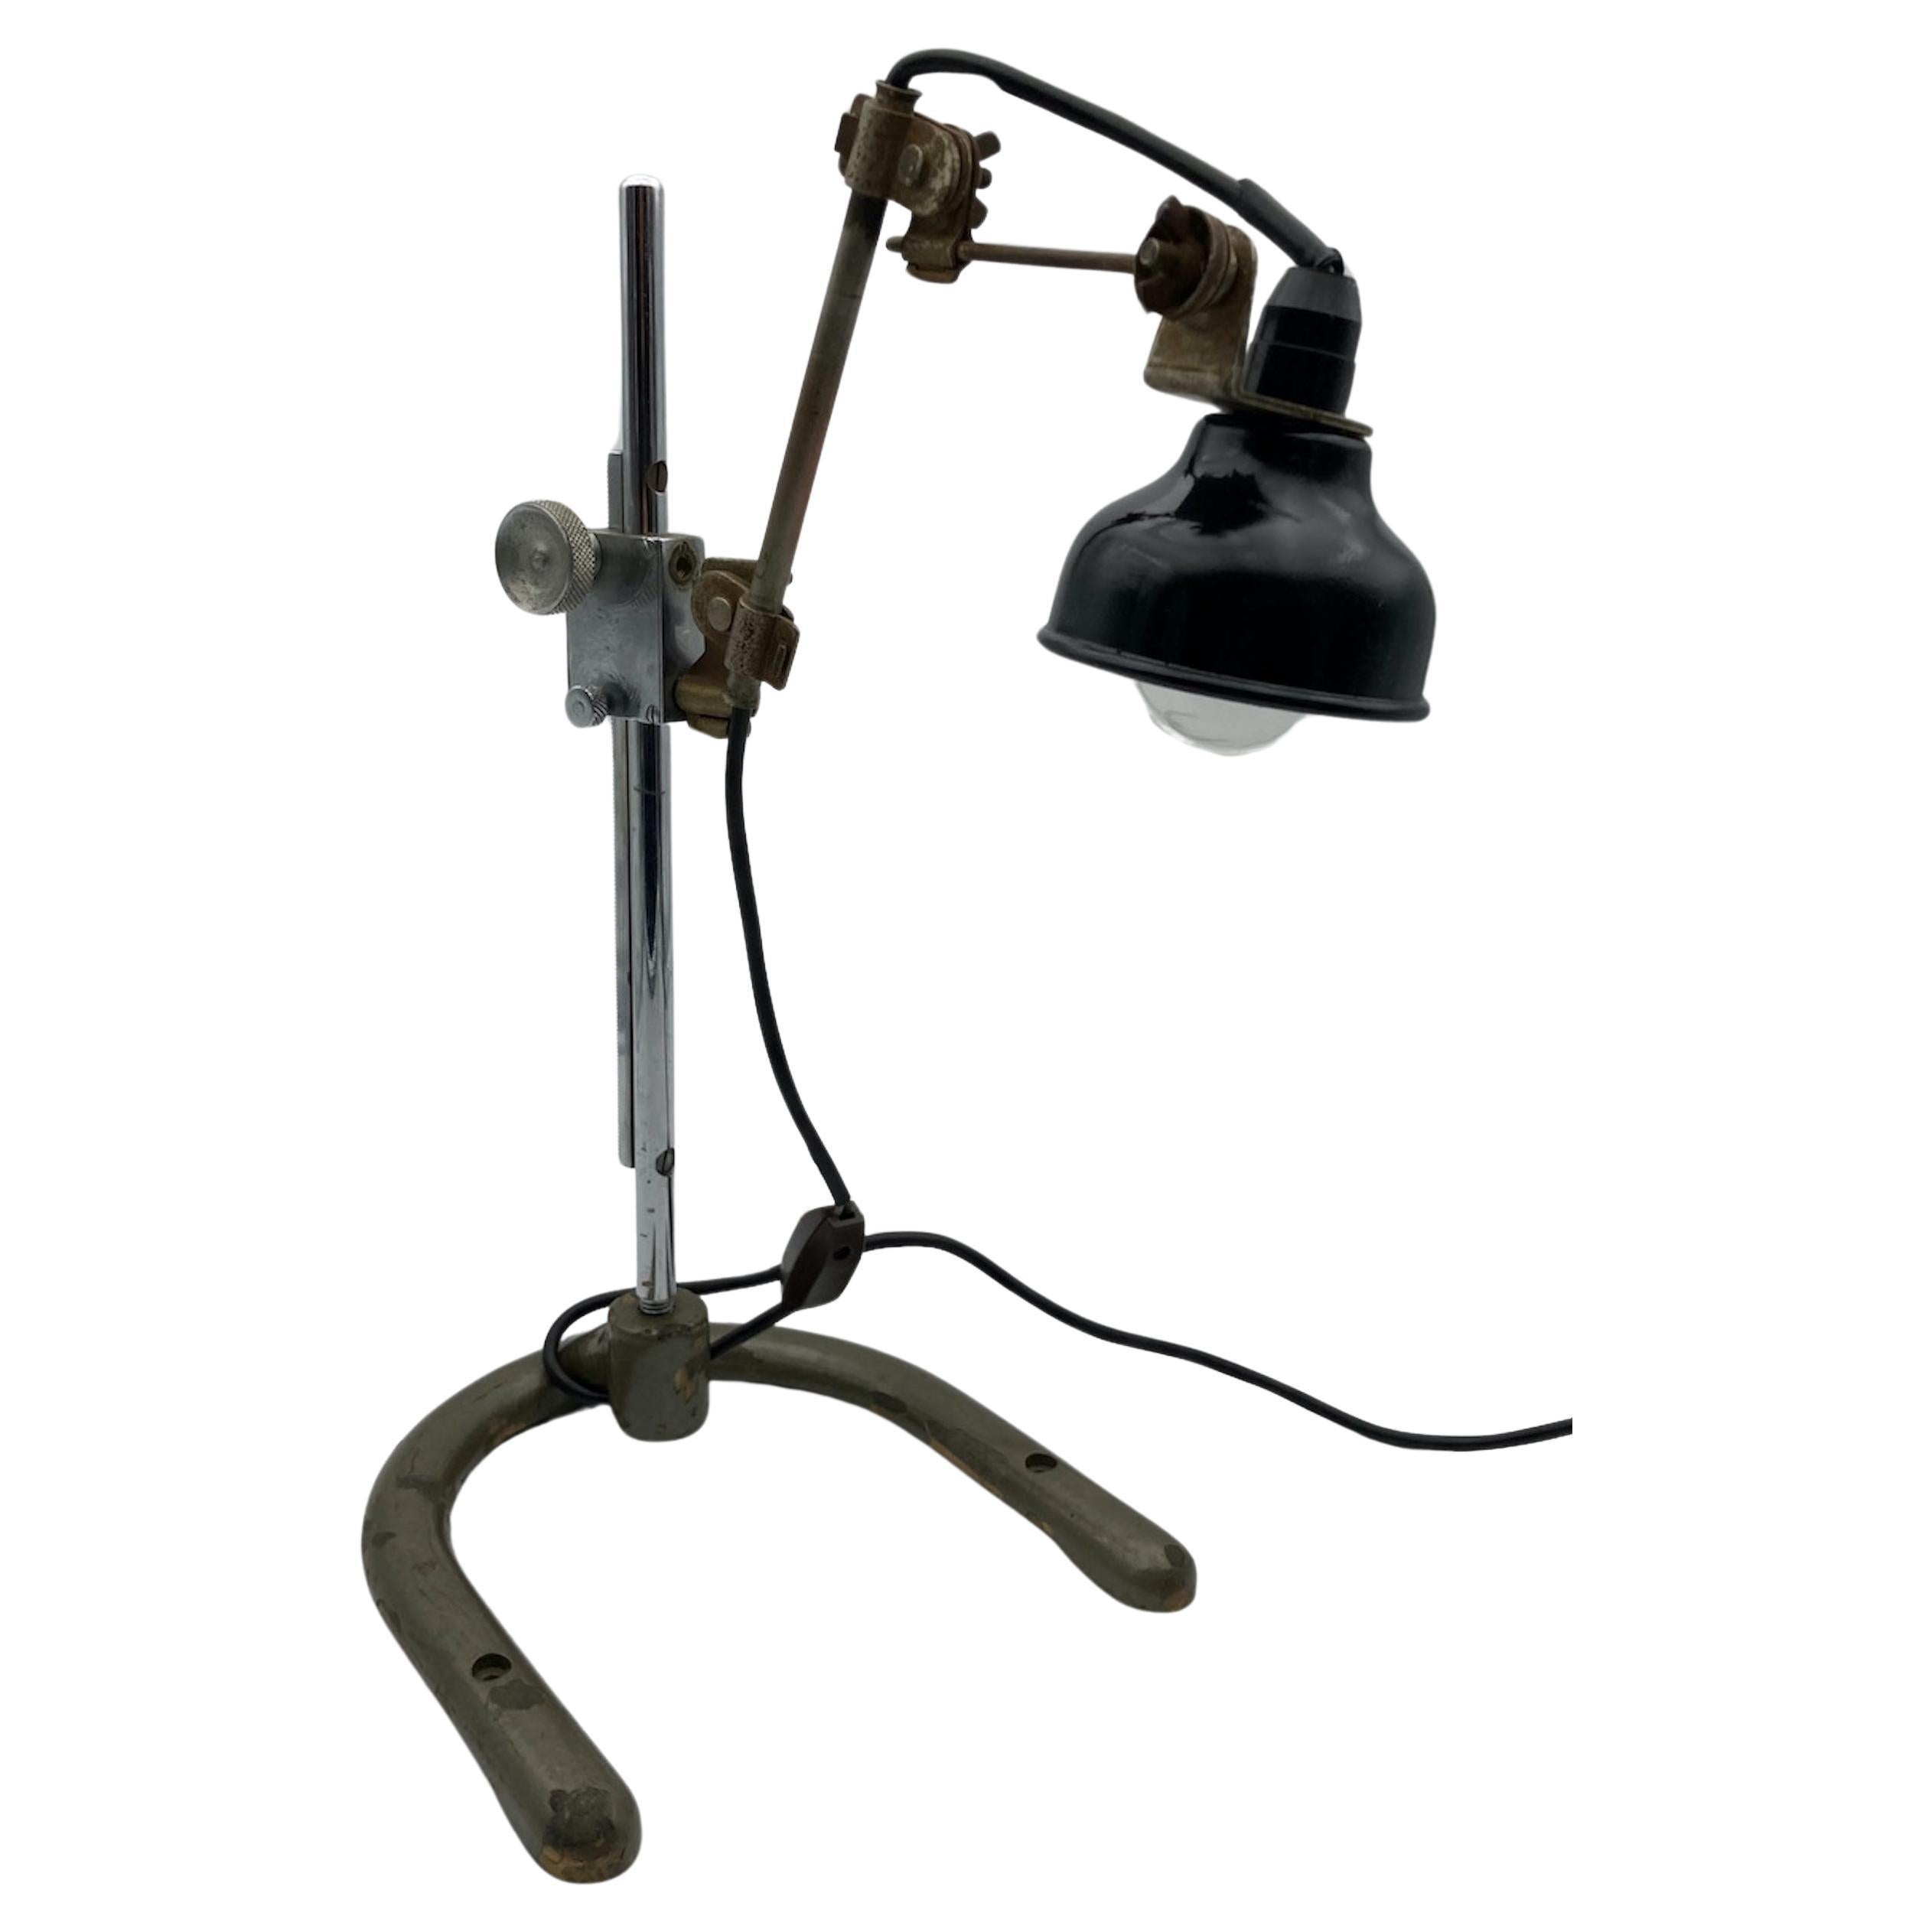 Large brutalist desk lamp, a one-off piece handcrafted in Northern Italy in the 70s. Built with solid metals of different types -steel, iron- and finish, the original patina gives a unmistakeable charm to this unique artisanal piece.

Due to the big